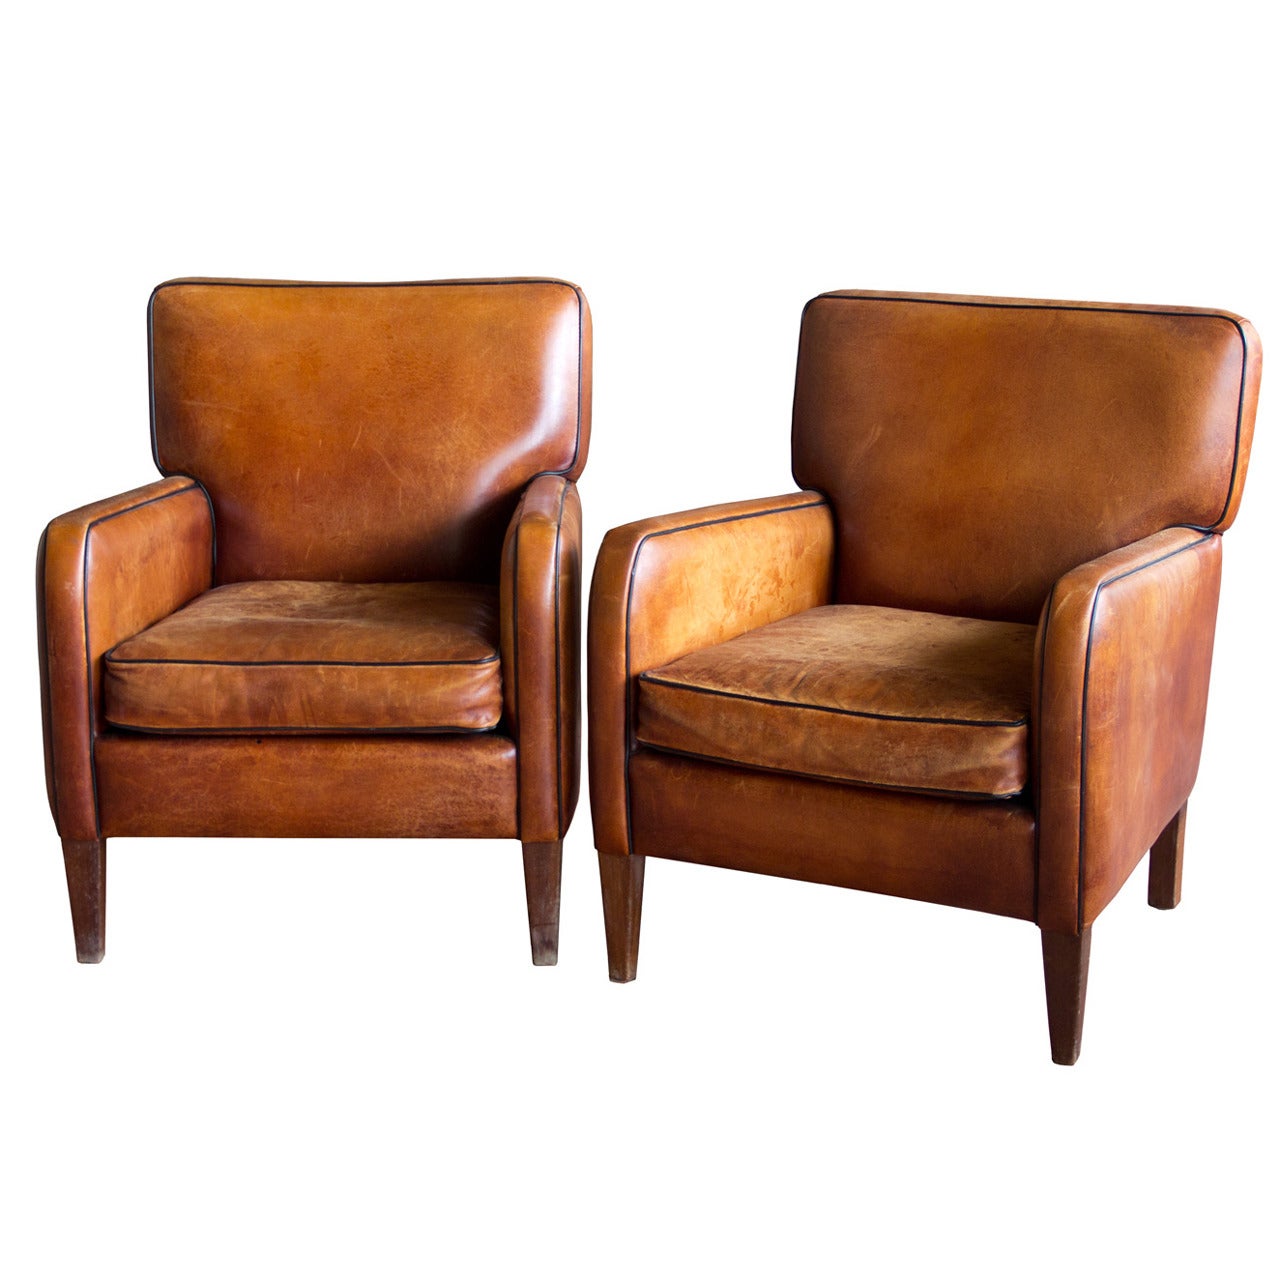 Pair of Vintage French Leather Chairs